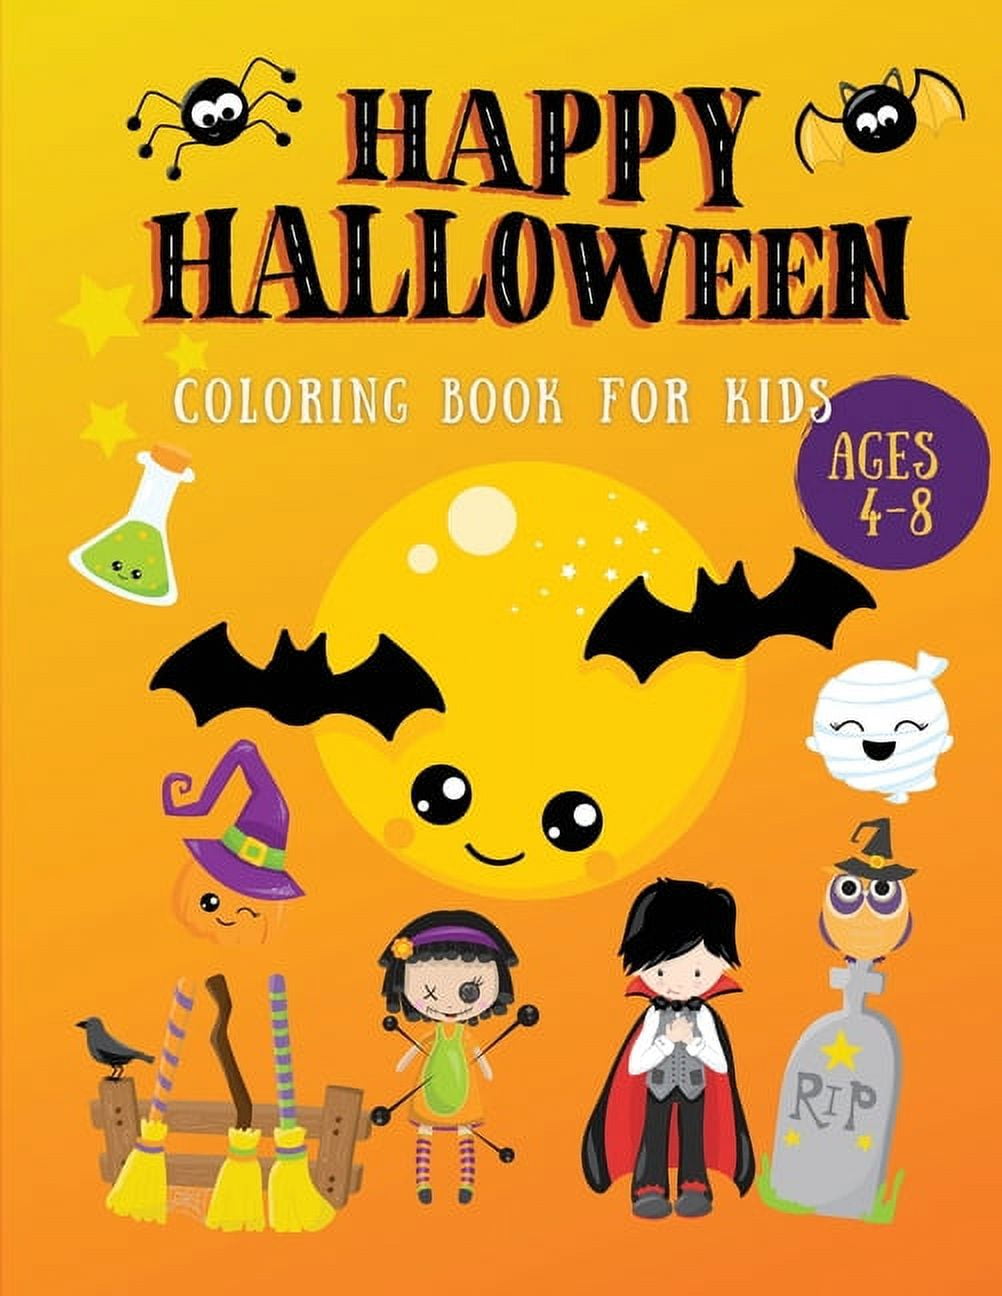 Max Fun 24 Pack Halloween Coloring Books for Kids Ages 2-4 4-8 8-12, Bulk  Mini Coloring Books for Boys Girls, Halloween Trick or Treat Goodie Bag